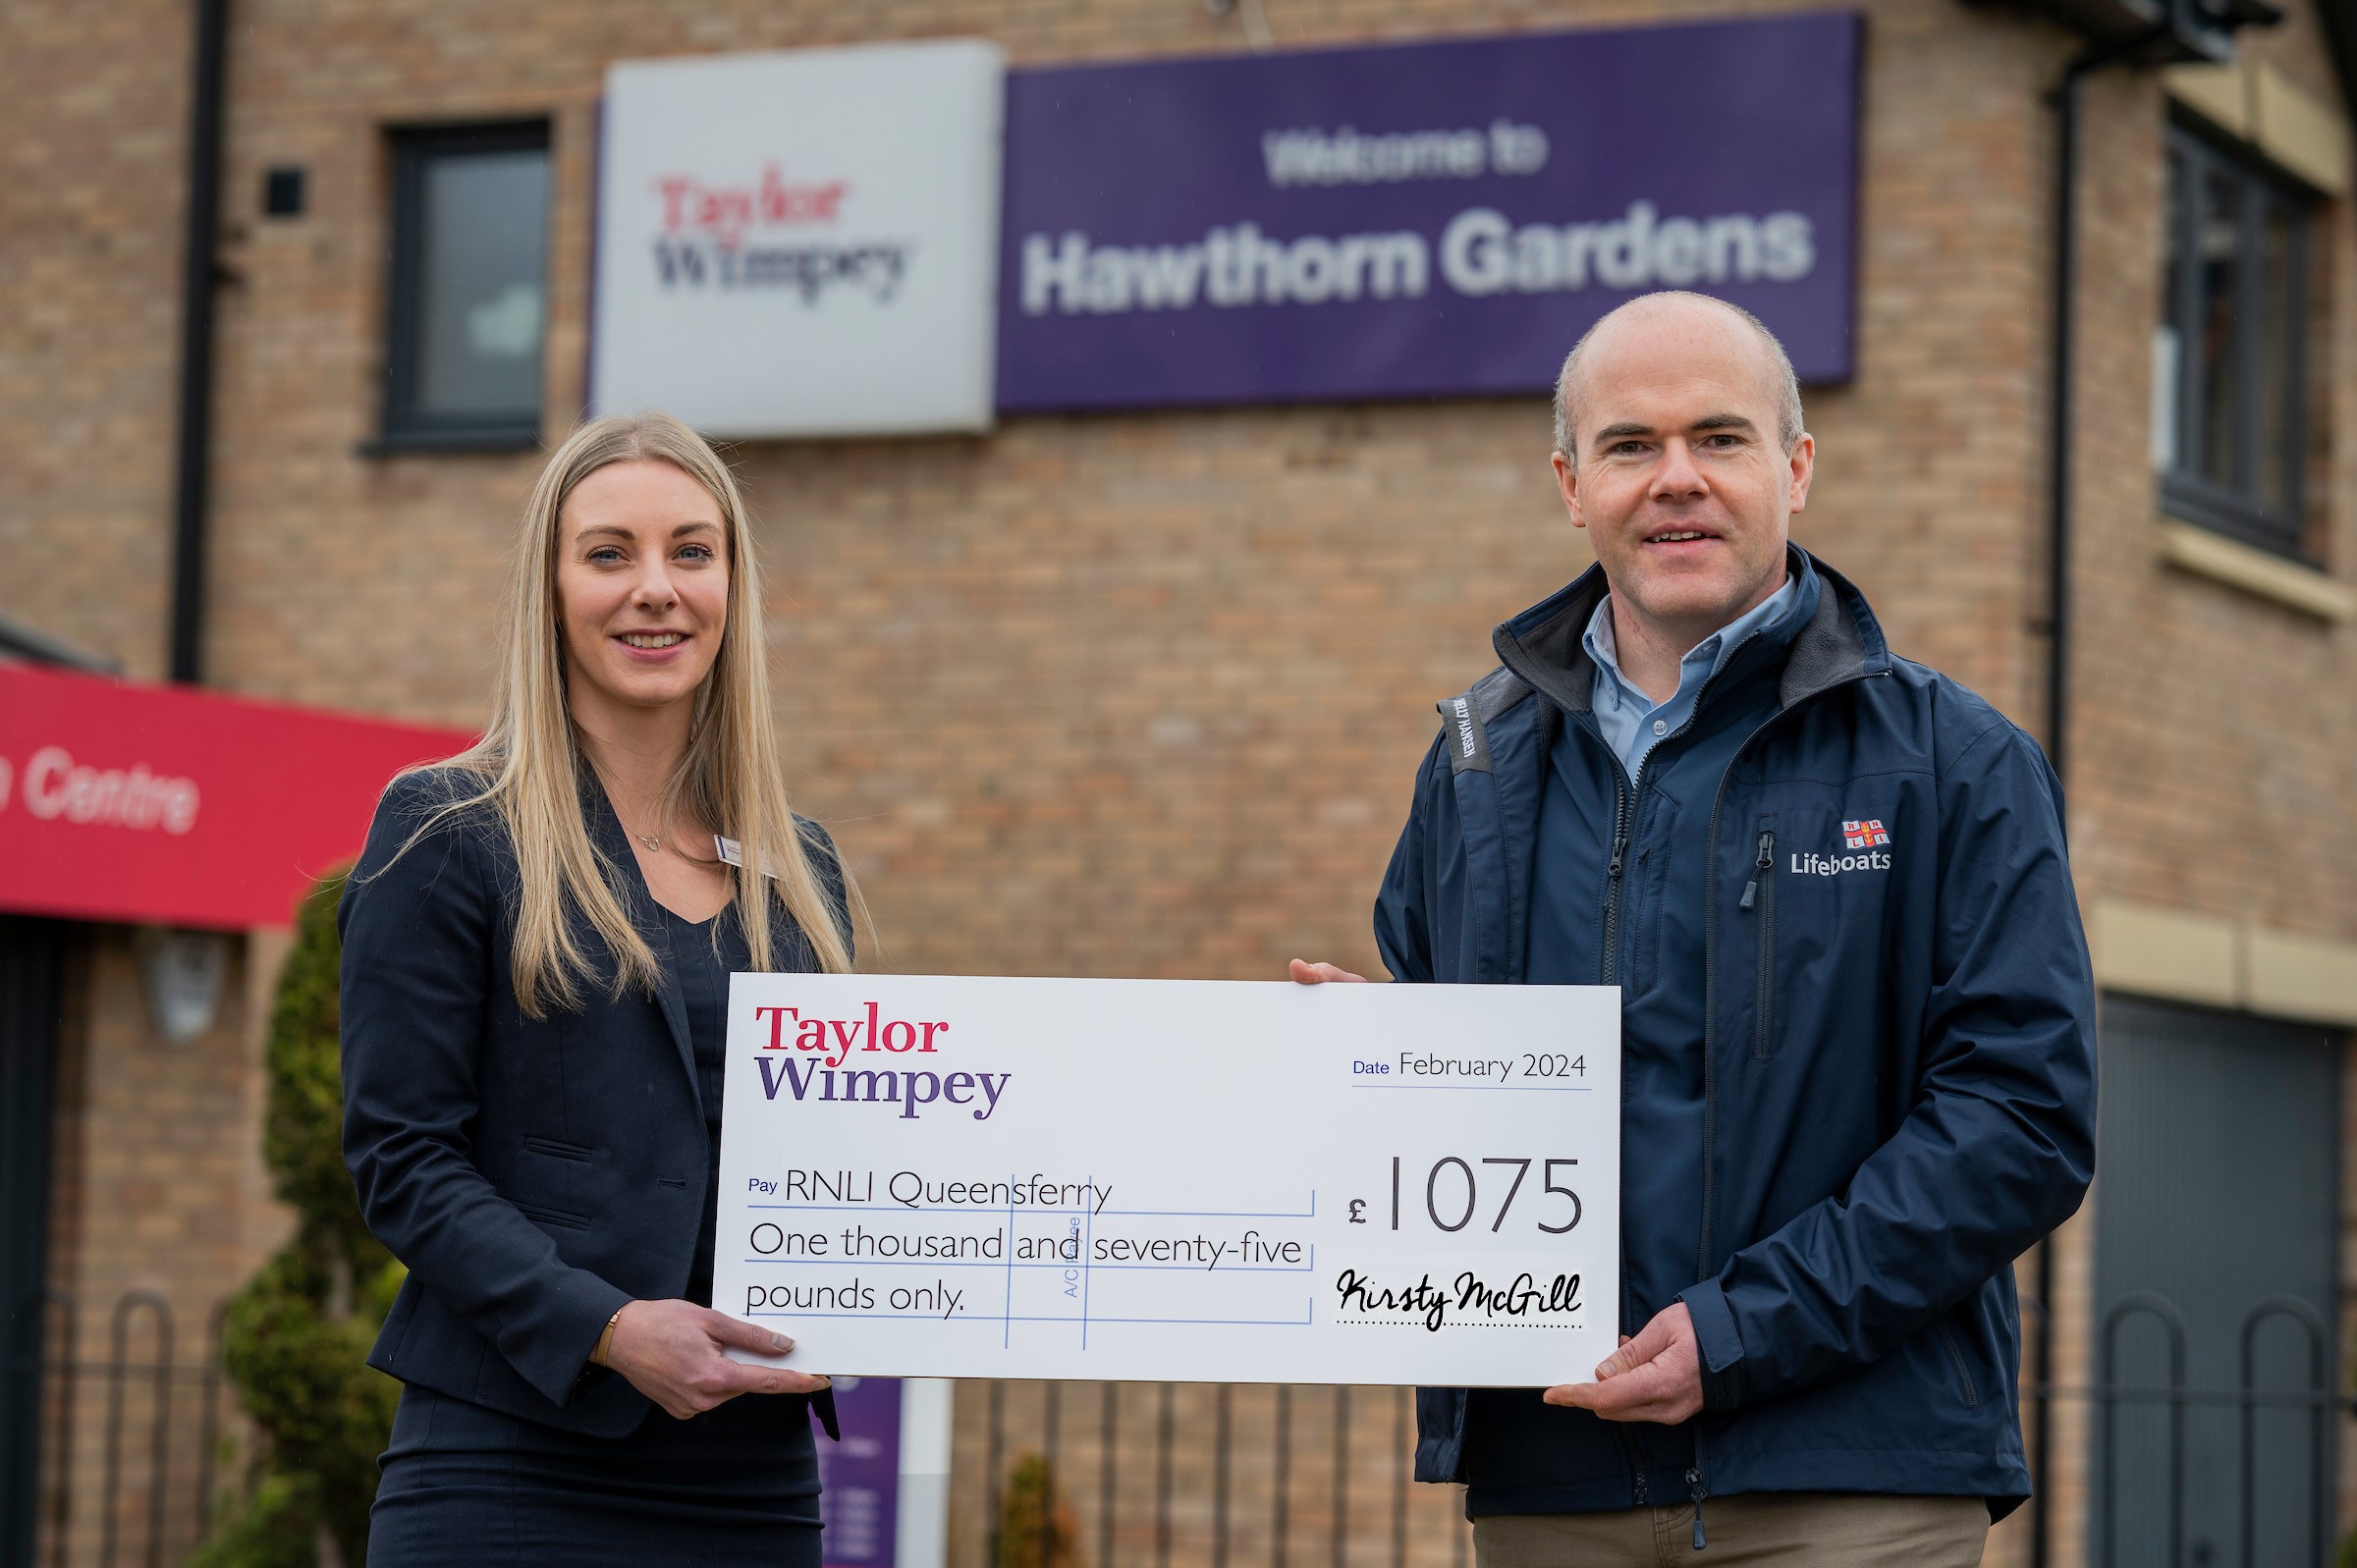 Taylor Wimpey donates a further £1,075 to Queensferry RNLI